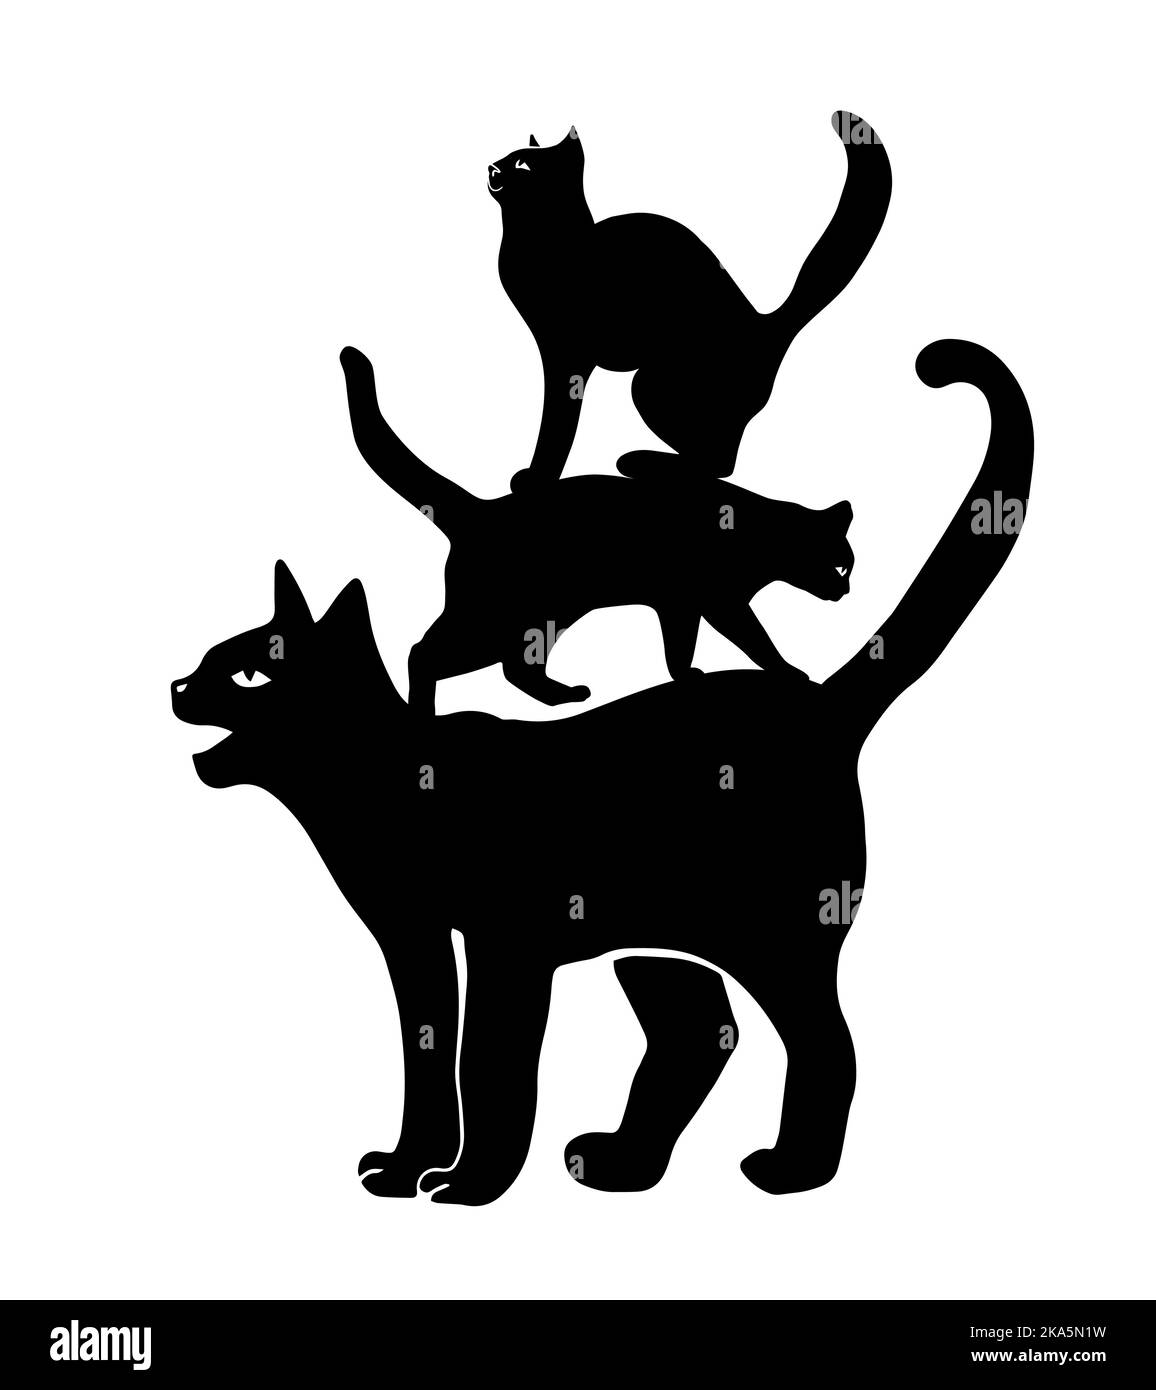 The cats are on top of each other. Vector illustration Stock Vector